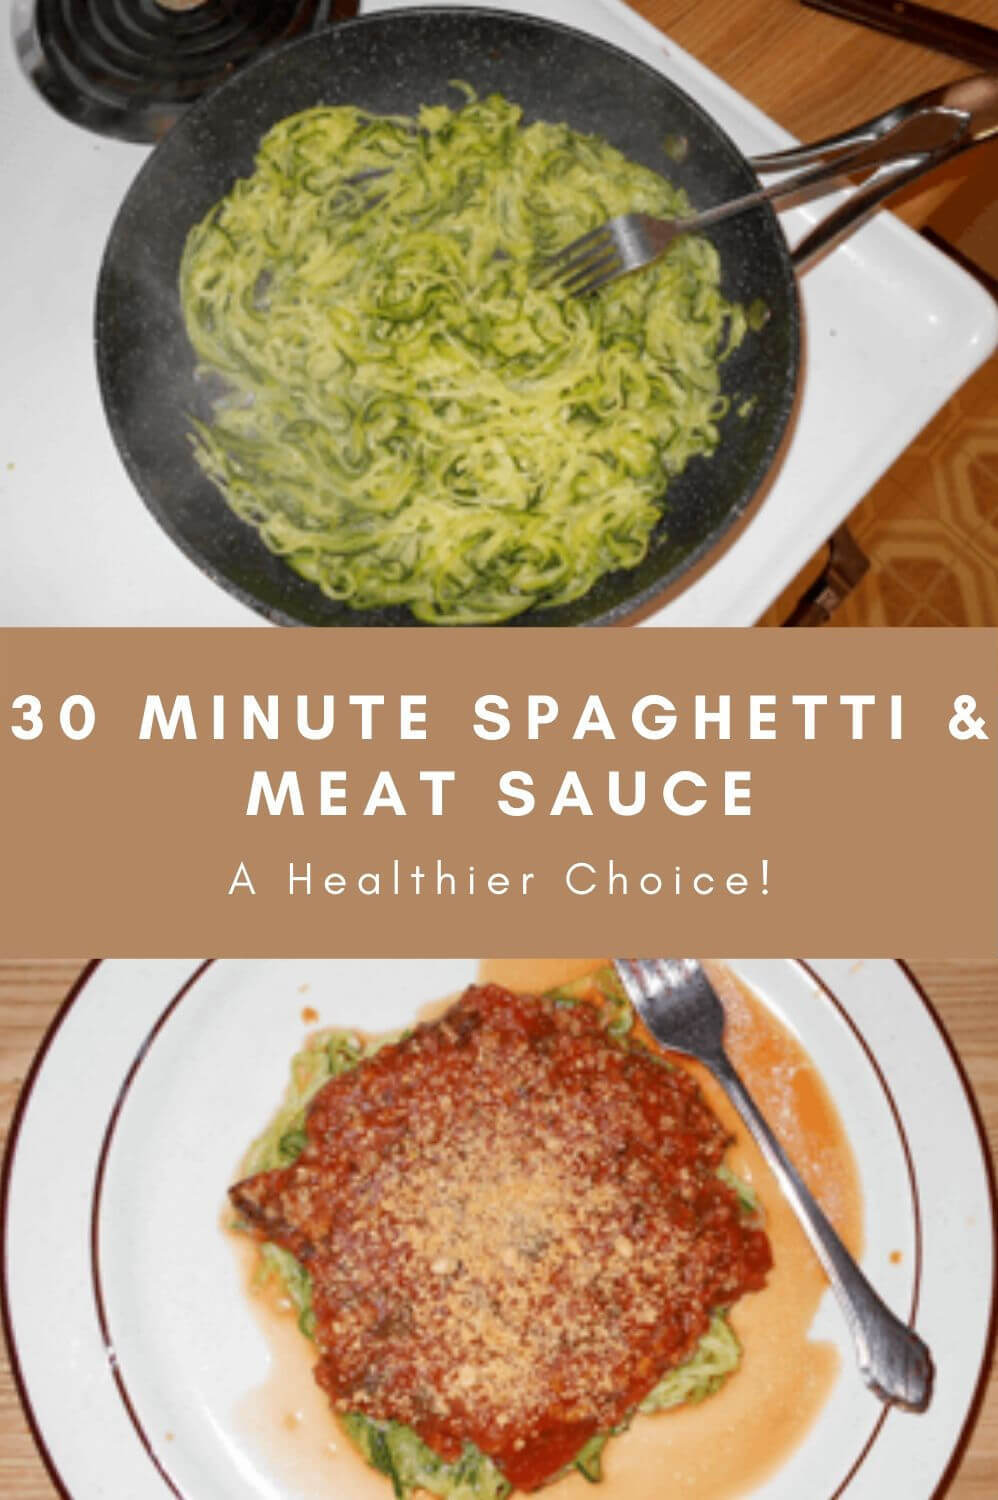 30 minute spaghetti and meat sauce - a healthier choice